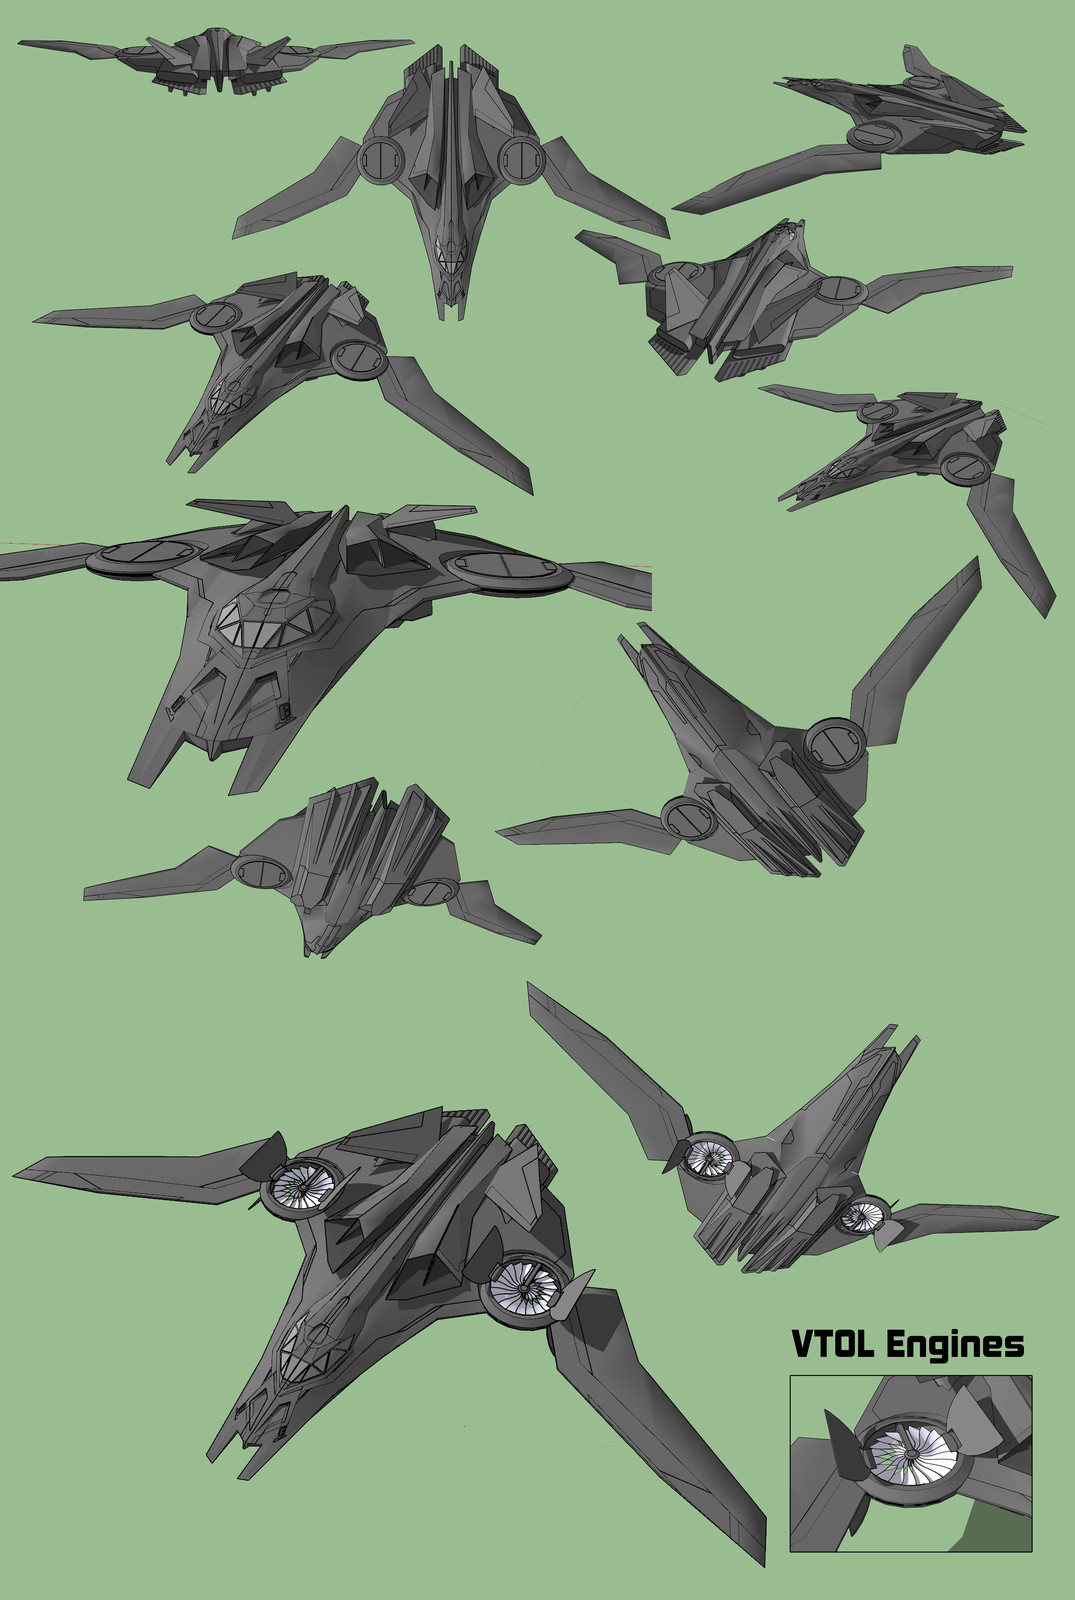 Batwing in normal flight mode.  Also shows the VTOL engines that are hidden in the wings